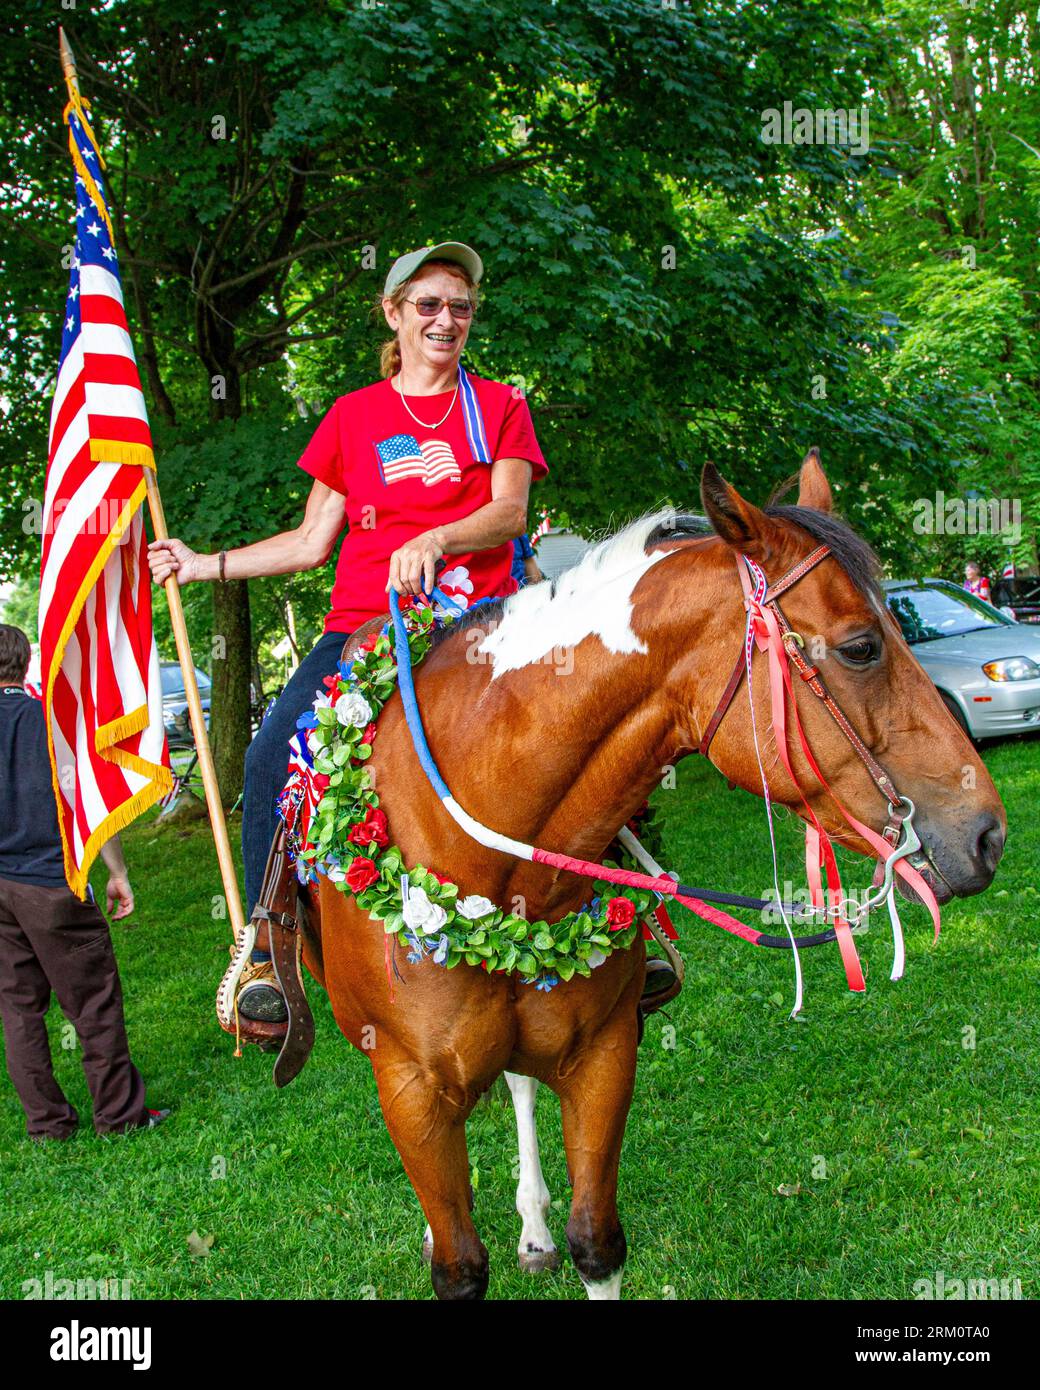 A fourth of July celebration and parade in a small rural Massachusetts town Stock Photo